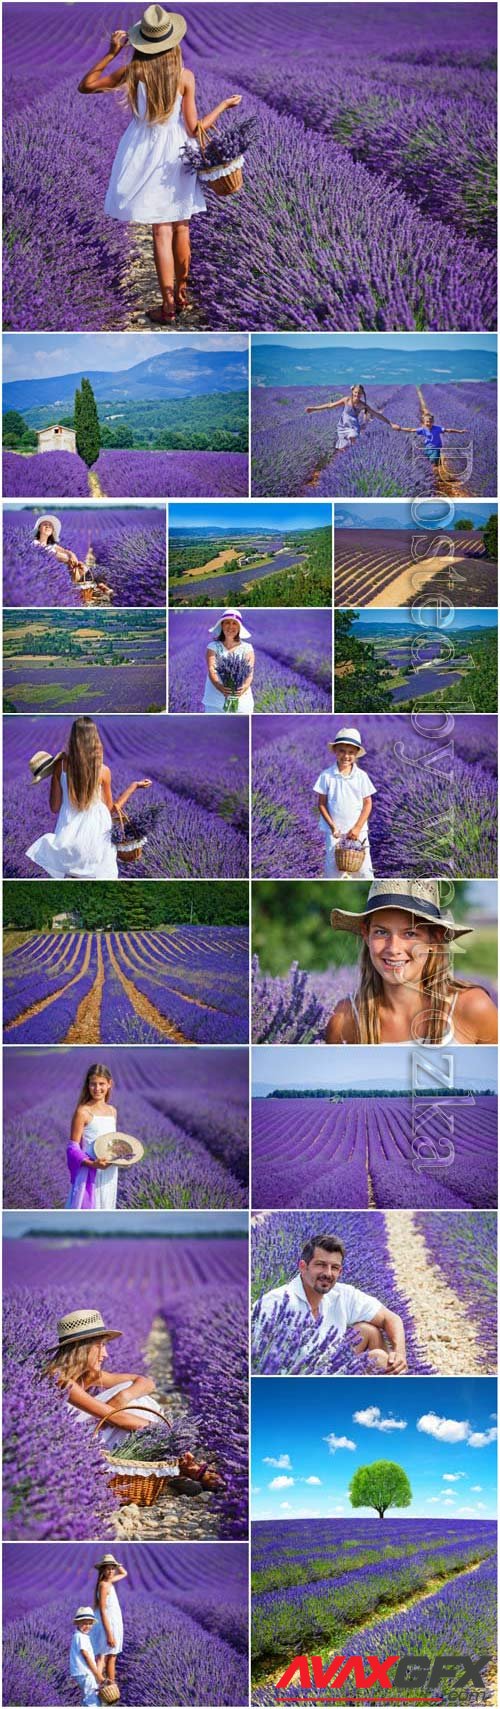 Wonderful fields with lavender, people and flowers stock photo